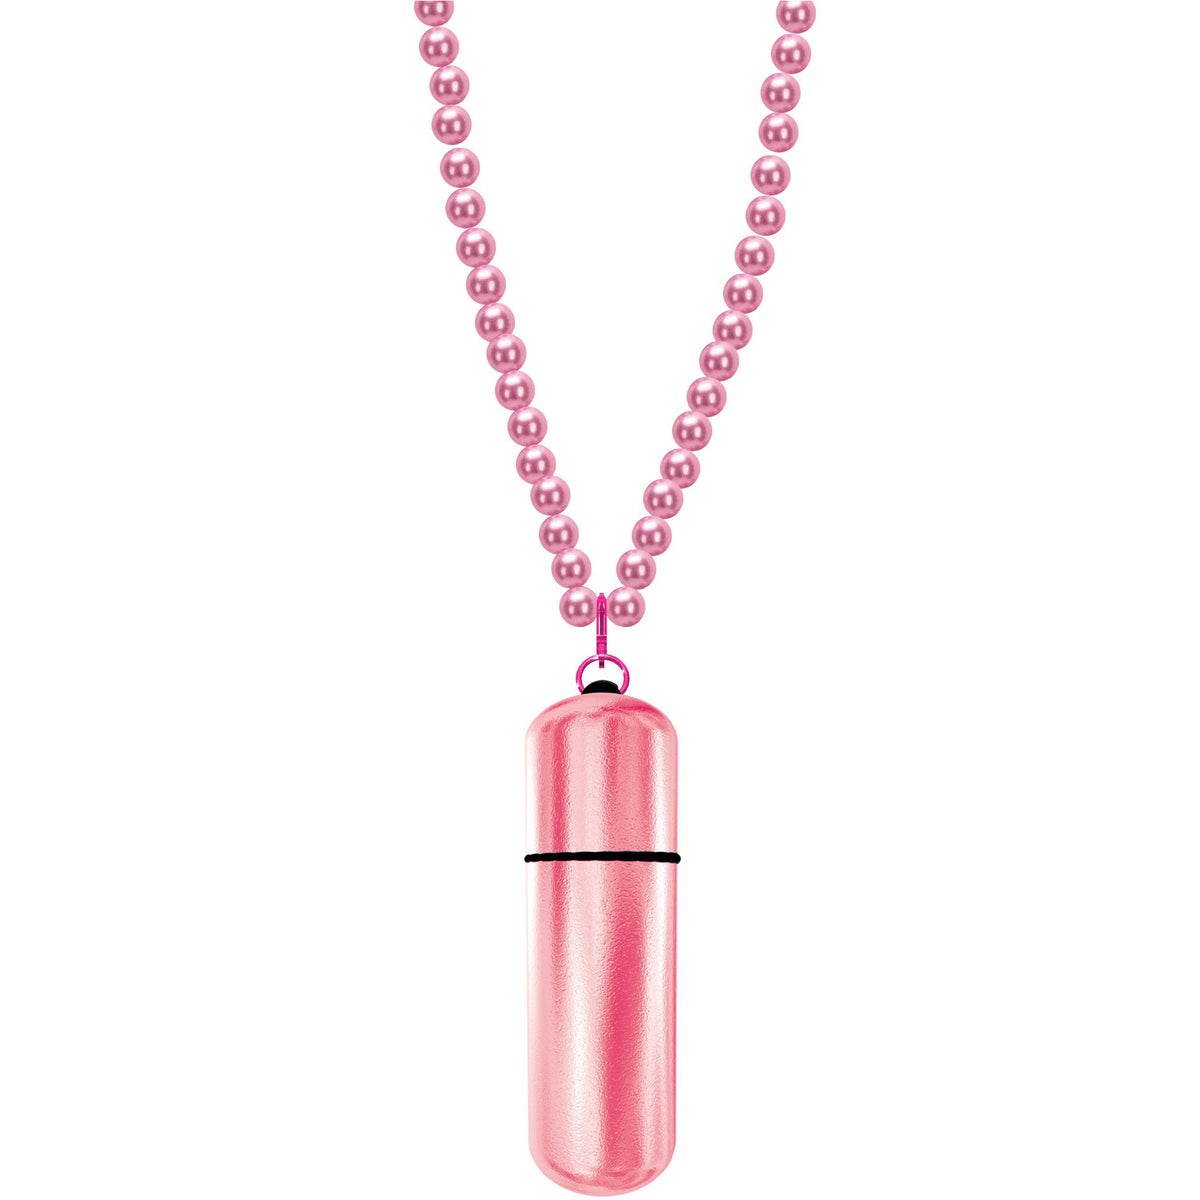 PowerBullet MiVibe Bullet Vibrator Necklace - Battery Operated - Pink